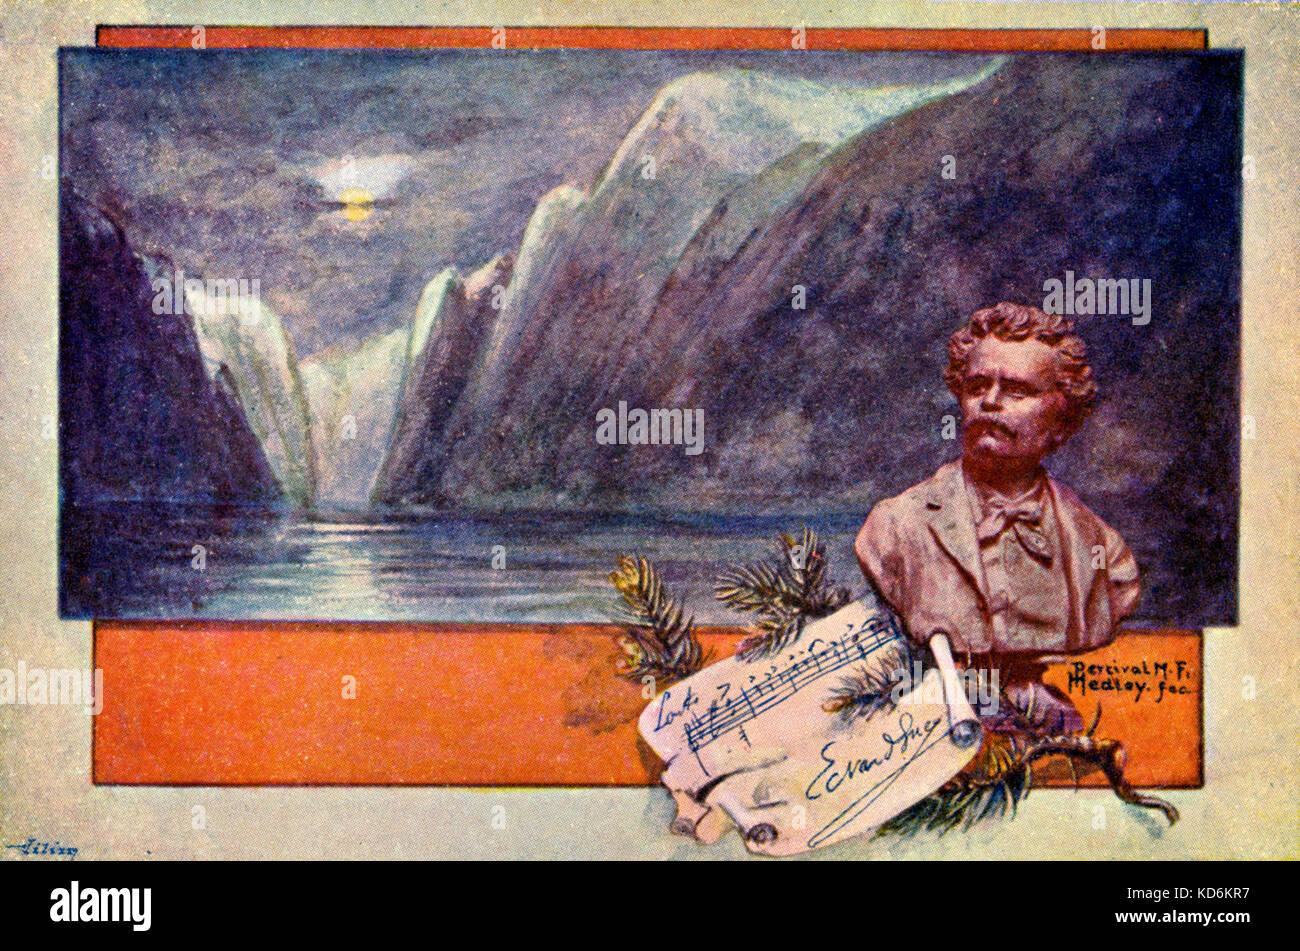 Edvard Hagerup Grieg - painting by M.F. Percival depicting Norwegian scenery (lake / fjord and mountains) as background to bust of the composer with notation and signature.   Norwegian composer of Scottish descent; 15 June 1843 - 4 September 1907. postcard Stock Photo